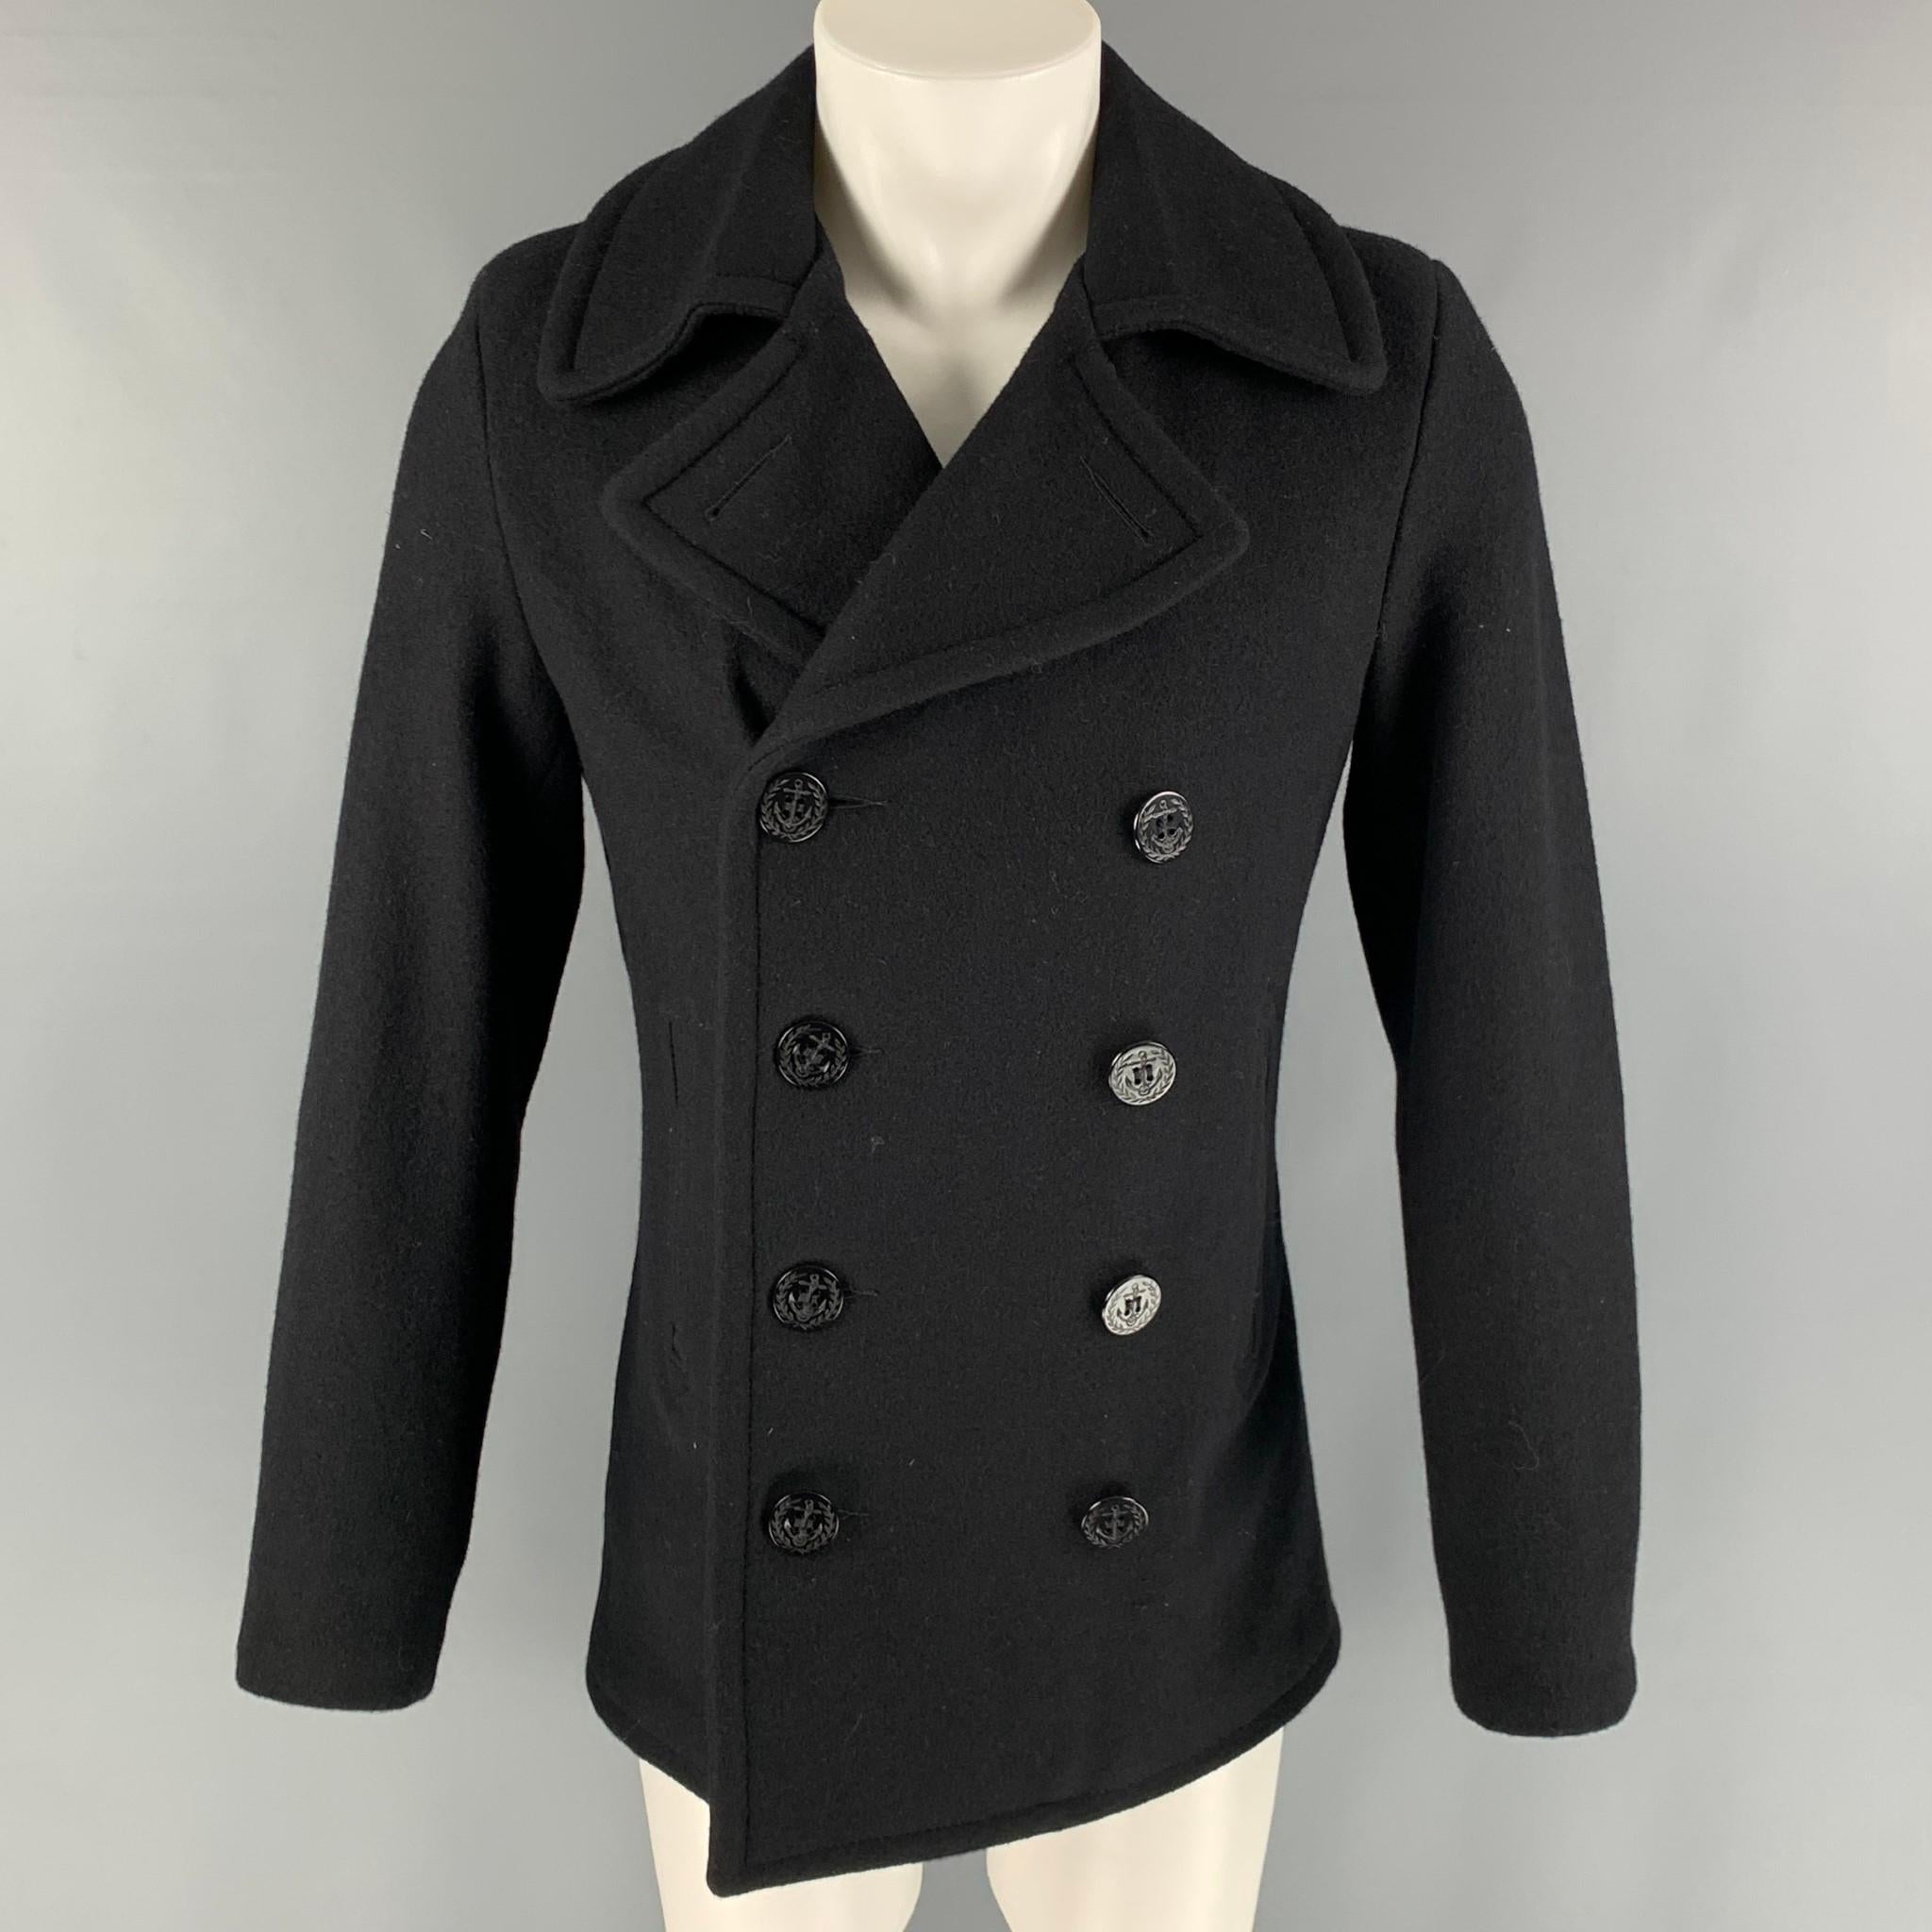 SCHOTT coat comes in a black wool and nylon material featuring a slim fit, large lapel, slit pockets, and a double breasted closure. Made in USA.

Very Good Pre-Owned Condition.
Marked: M

Measurements:

Shoulder: 17 in.
Chest: 38 in.
Sleeve: 26